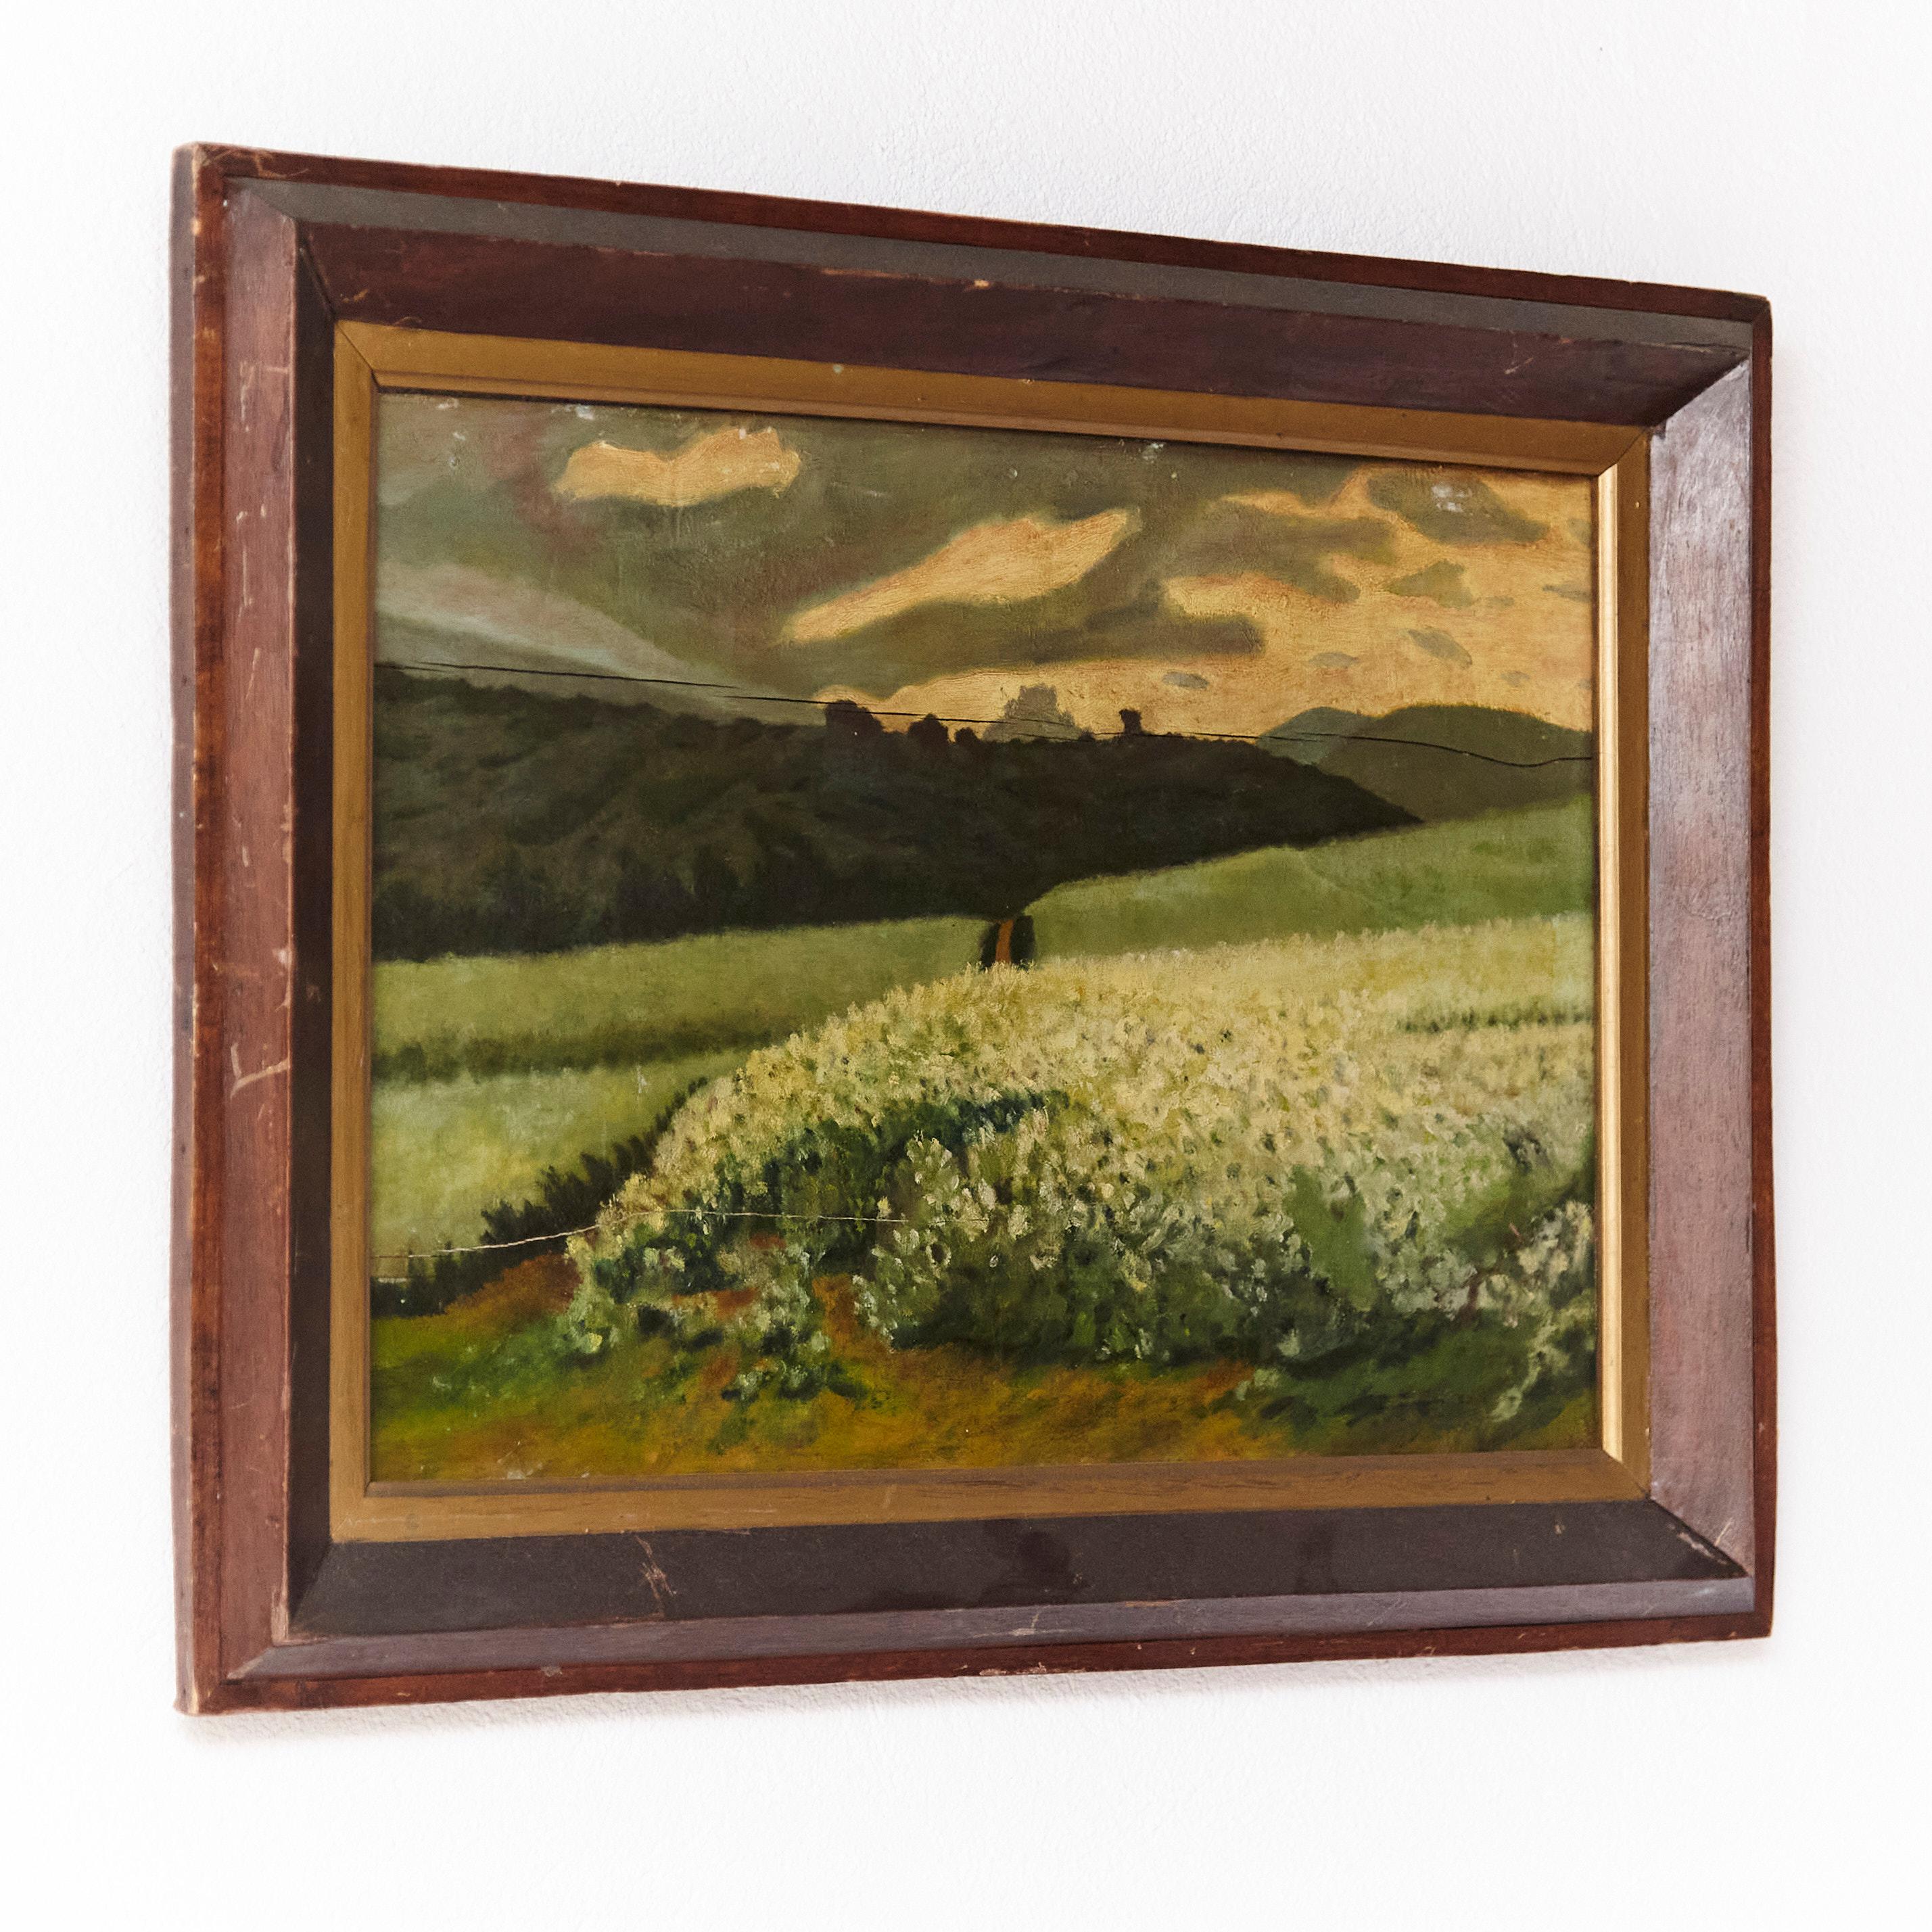 Painting, oil on wood

Made in Spain, circa 1940.

By unknown artist

In good original condition, with minor wear consistent with age and use, preserving a beautiful patina.

